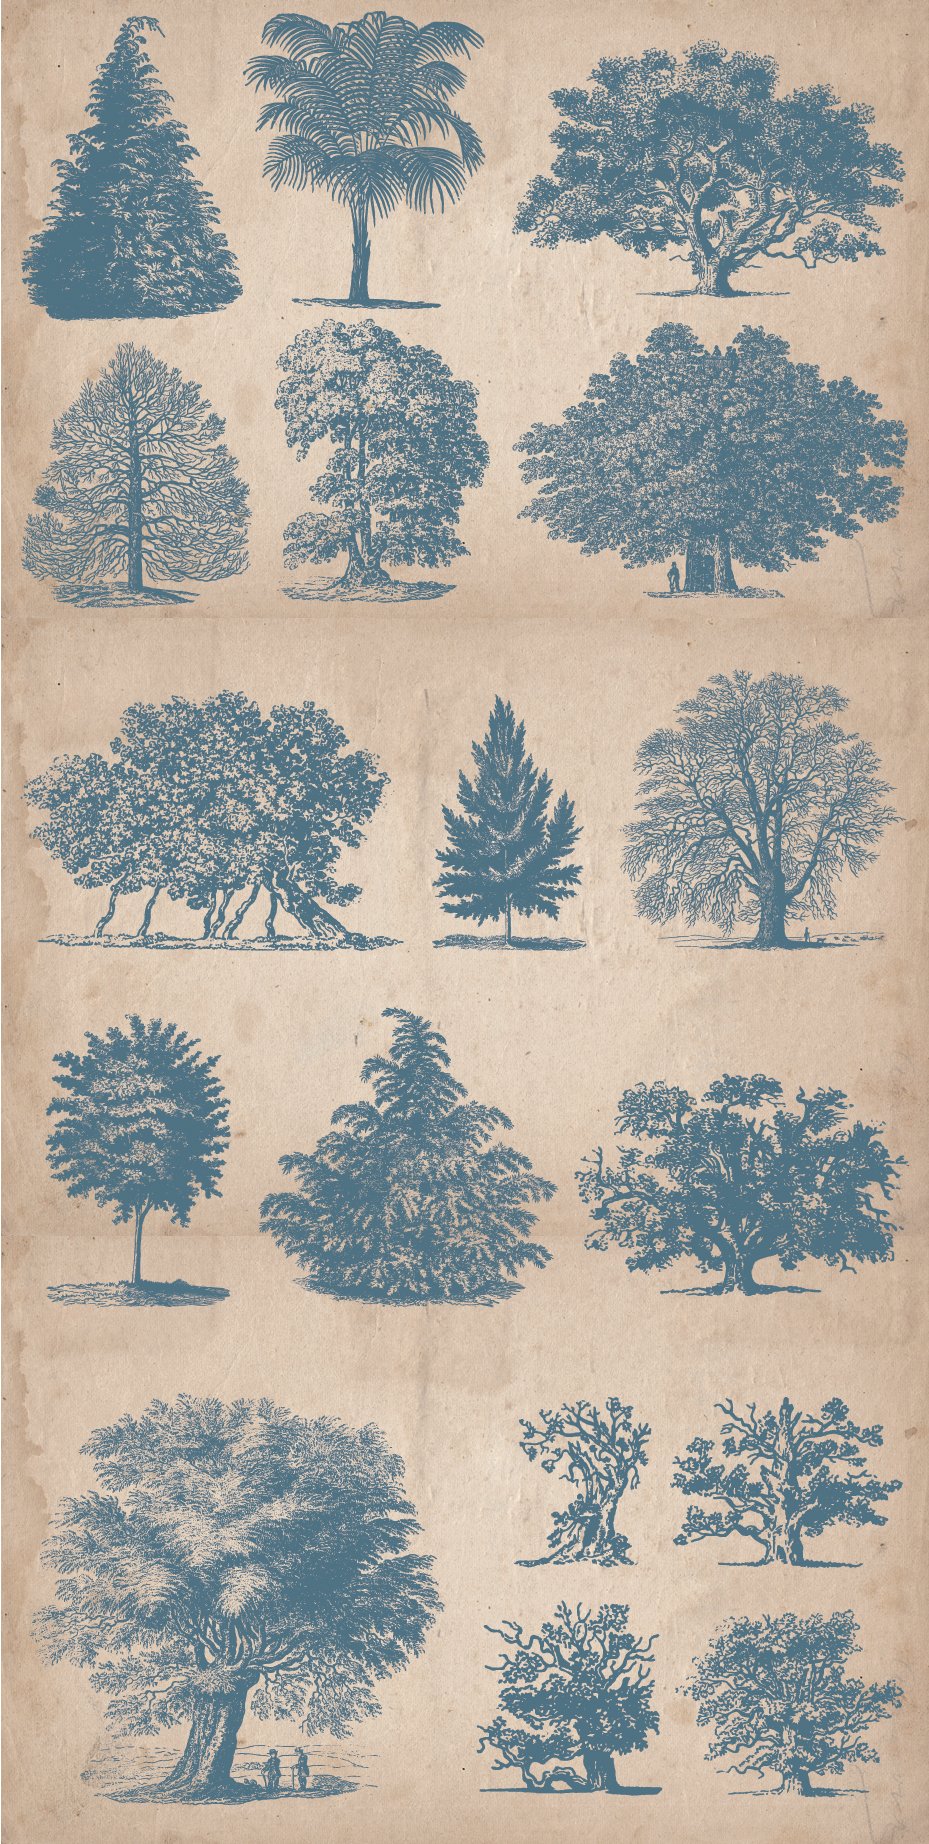 Bunch of trees that are drawn on a piece of paper.